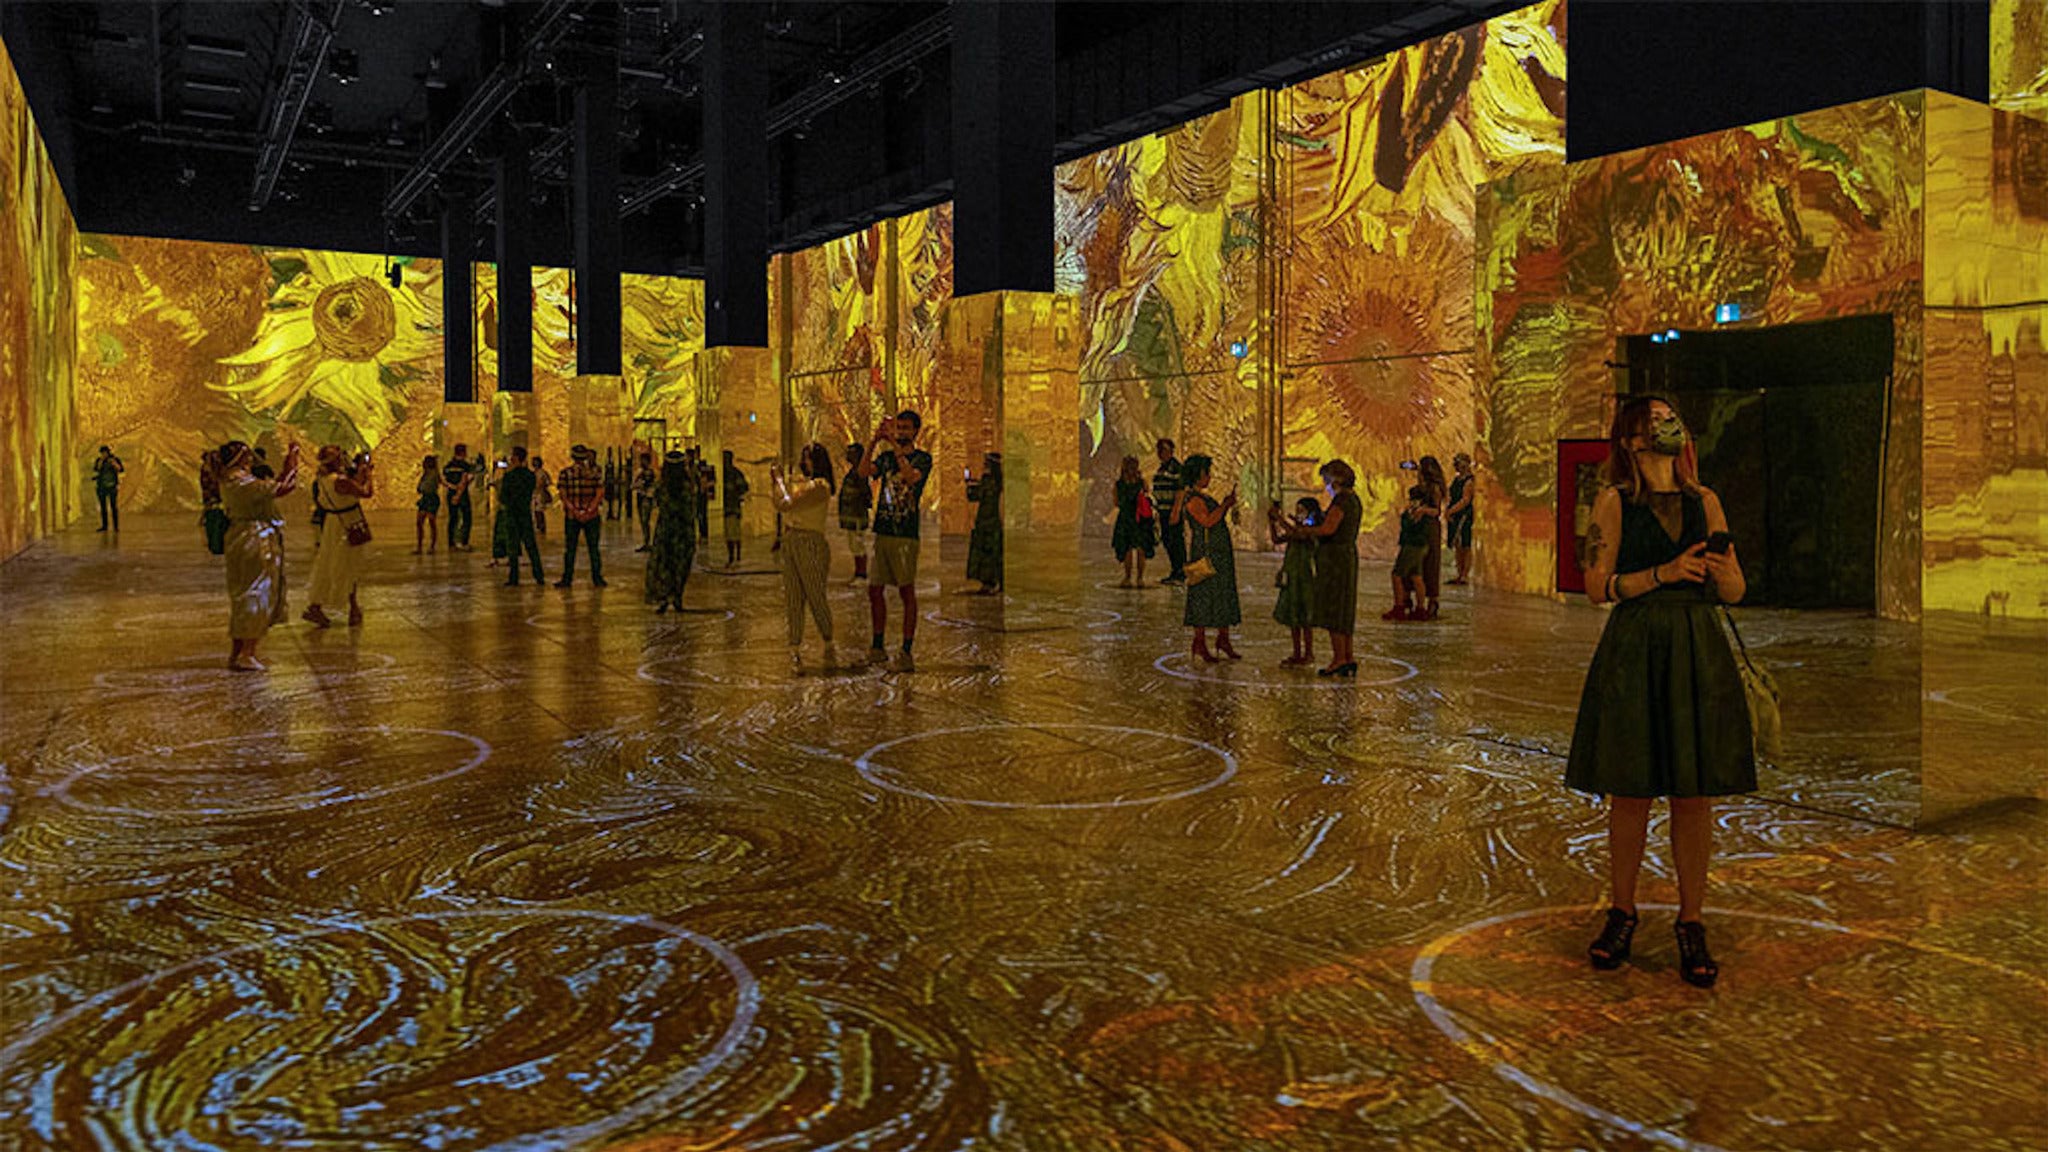 Immersive Van Gogh Madison December 22, 2022 at Greenway Station in